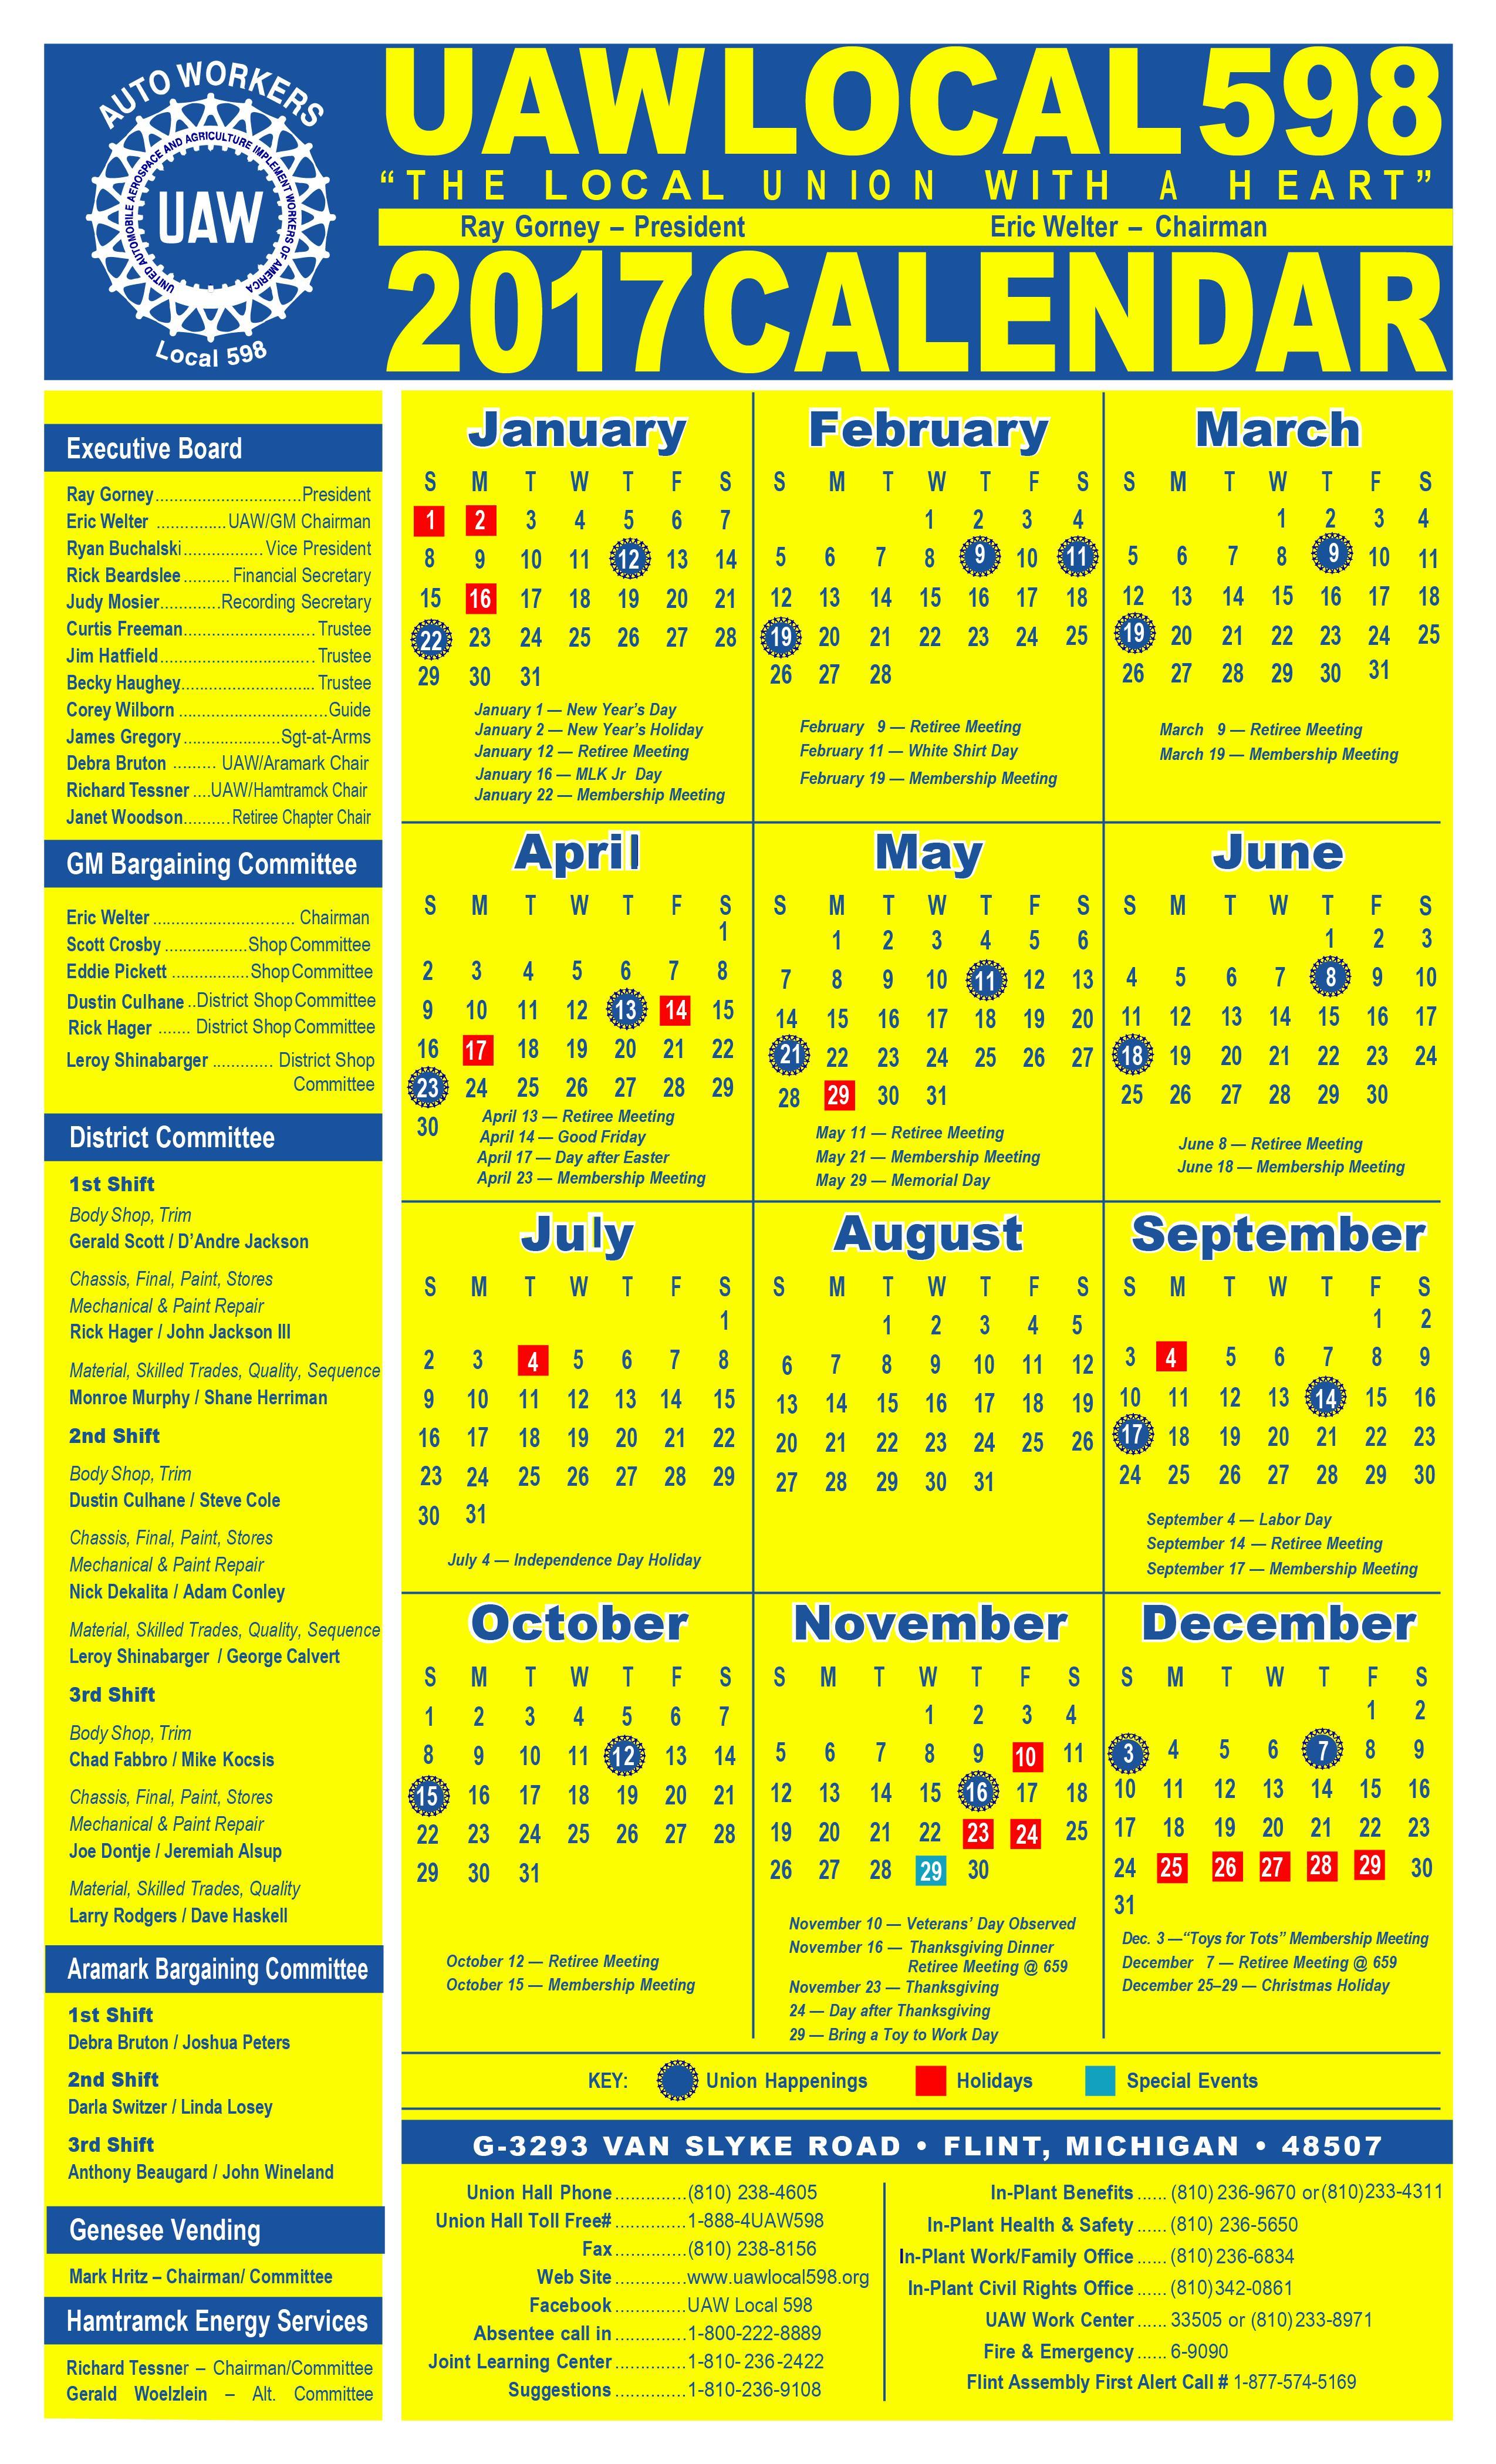 Uaw Holiday Calendar 2022 Customize and Print